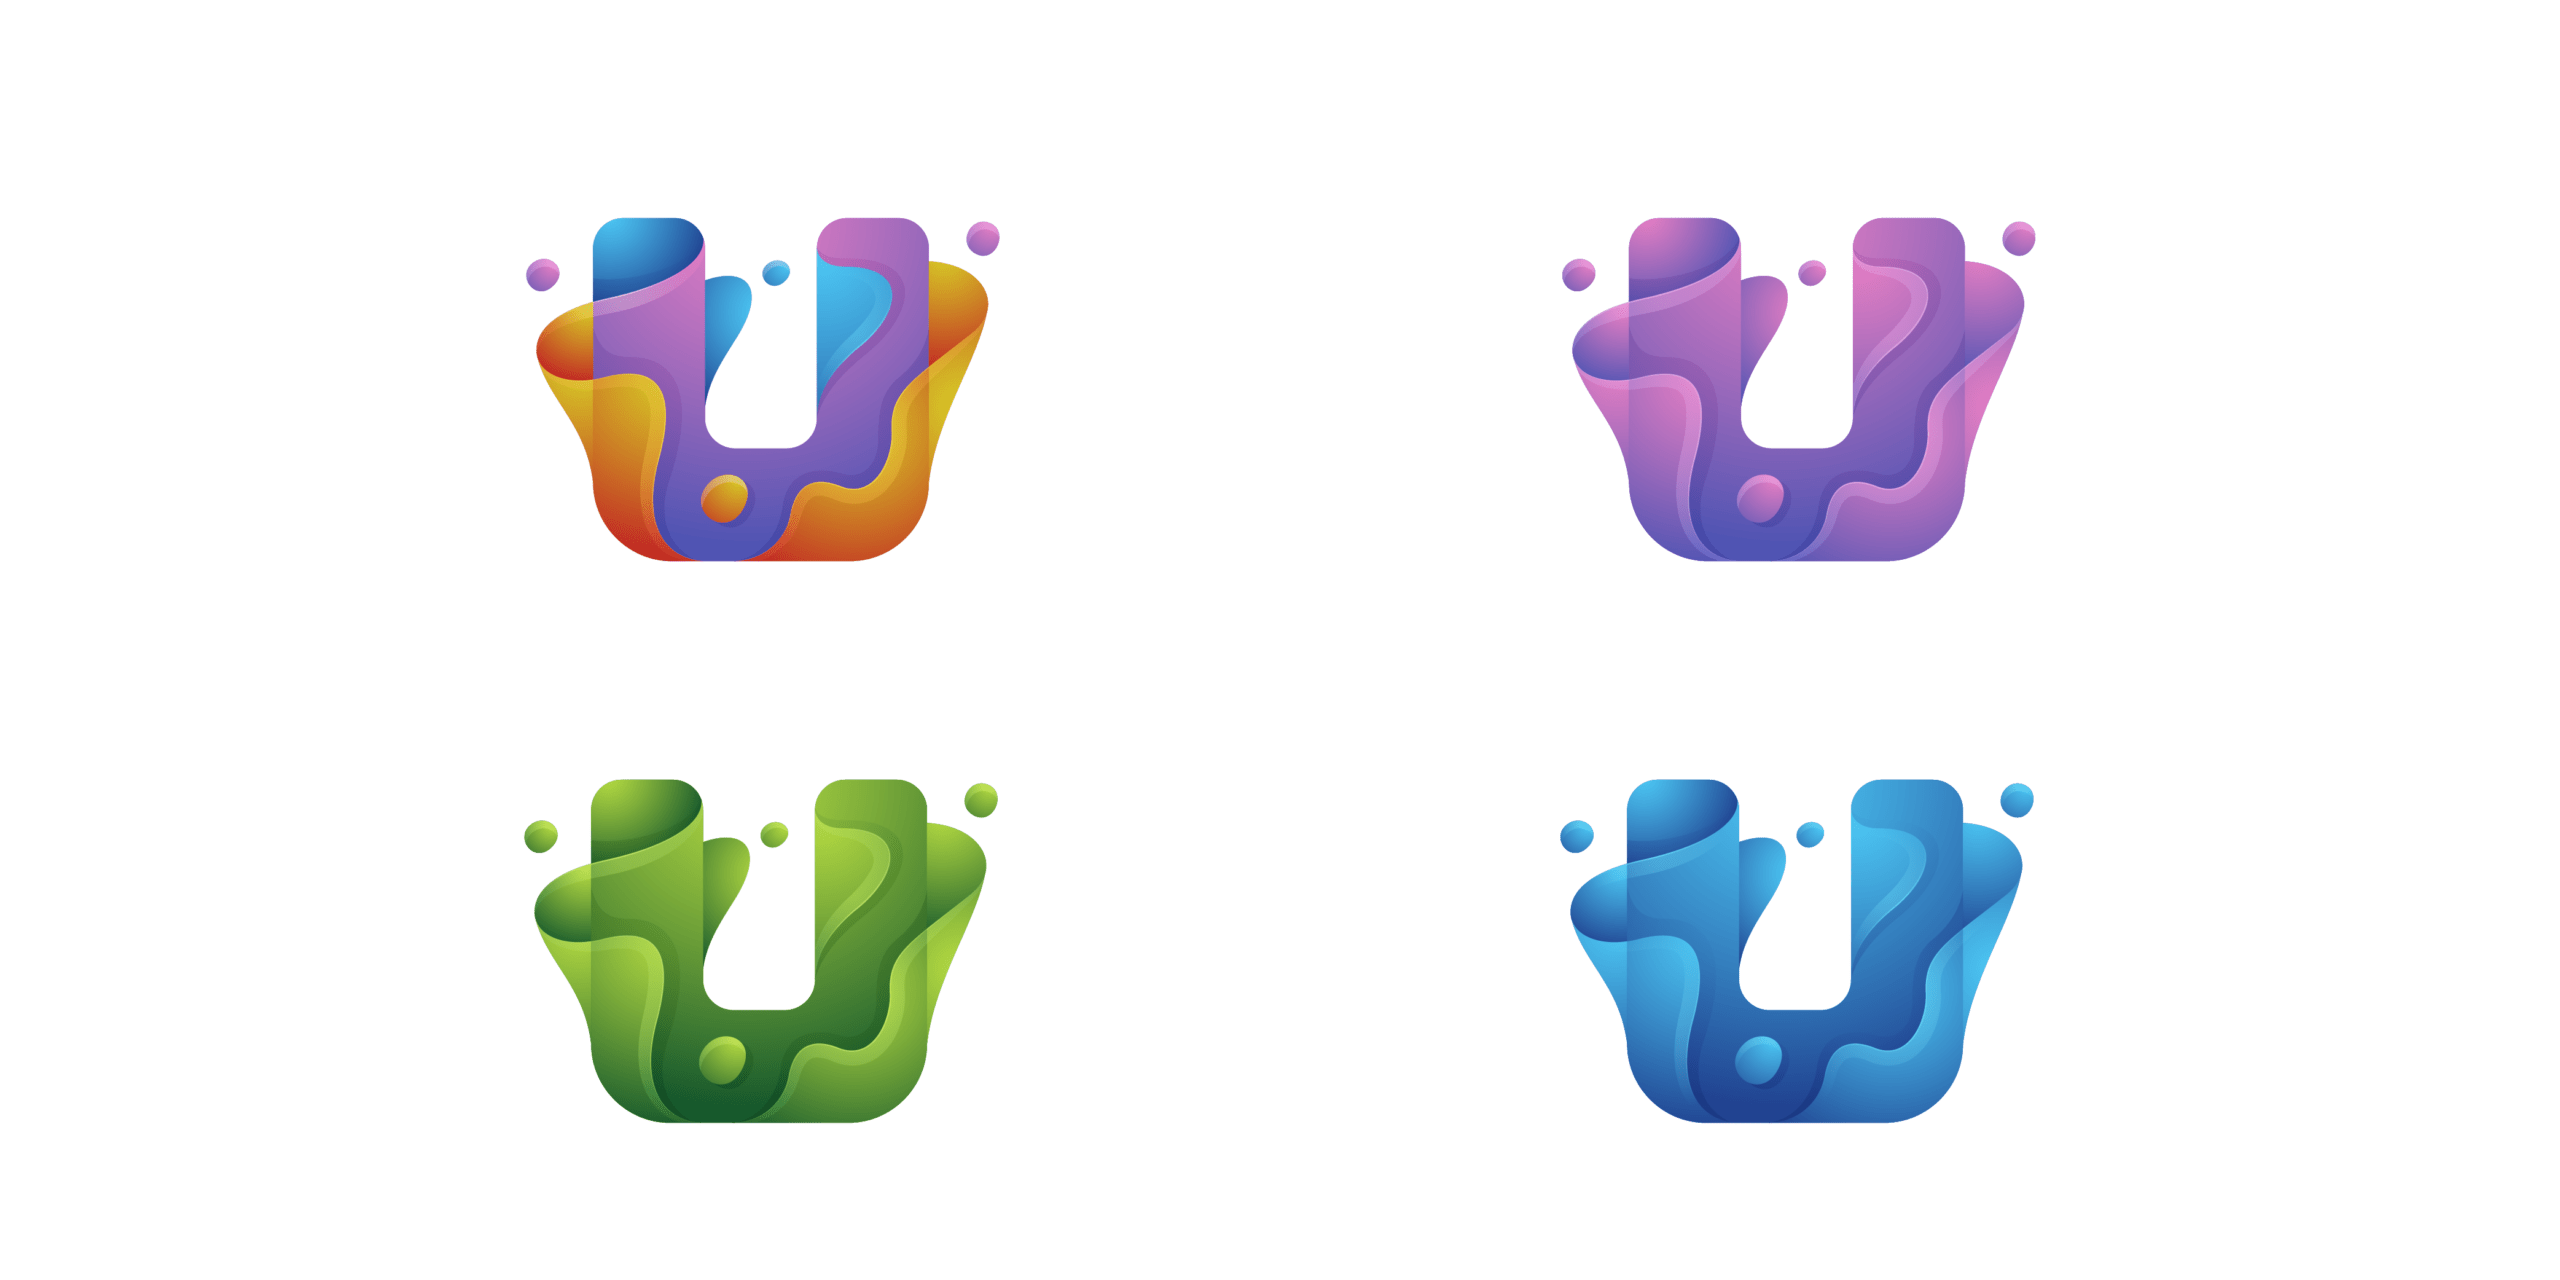 A picture of a logo with different color variations.